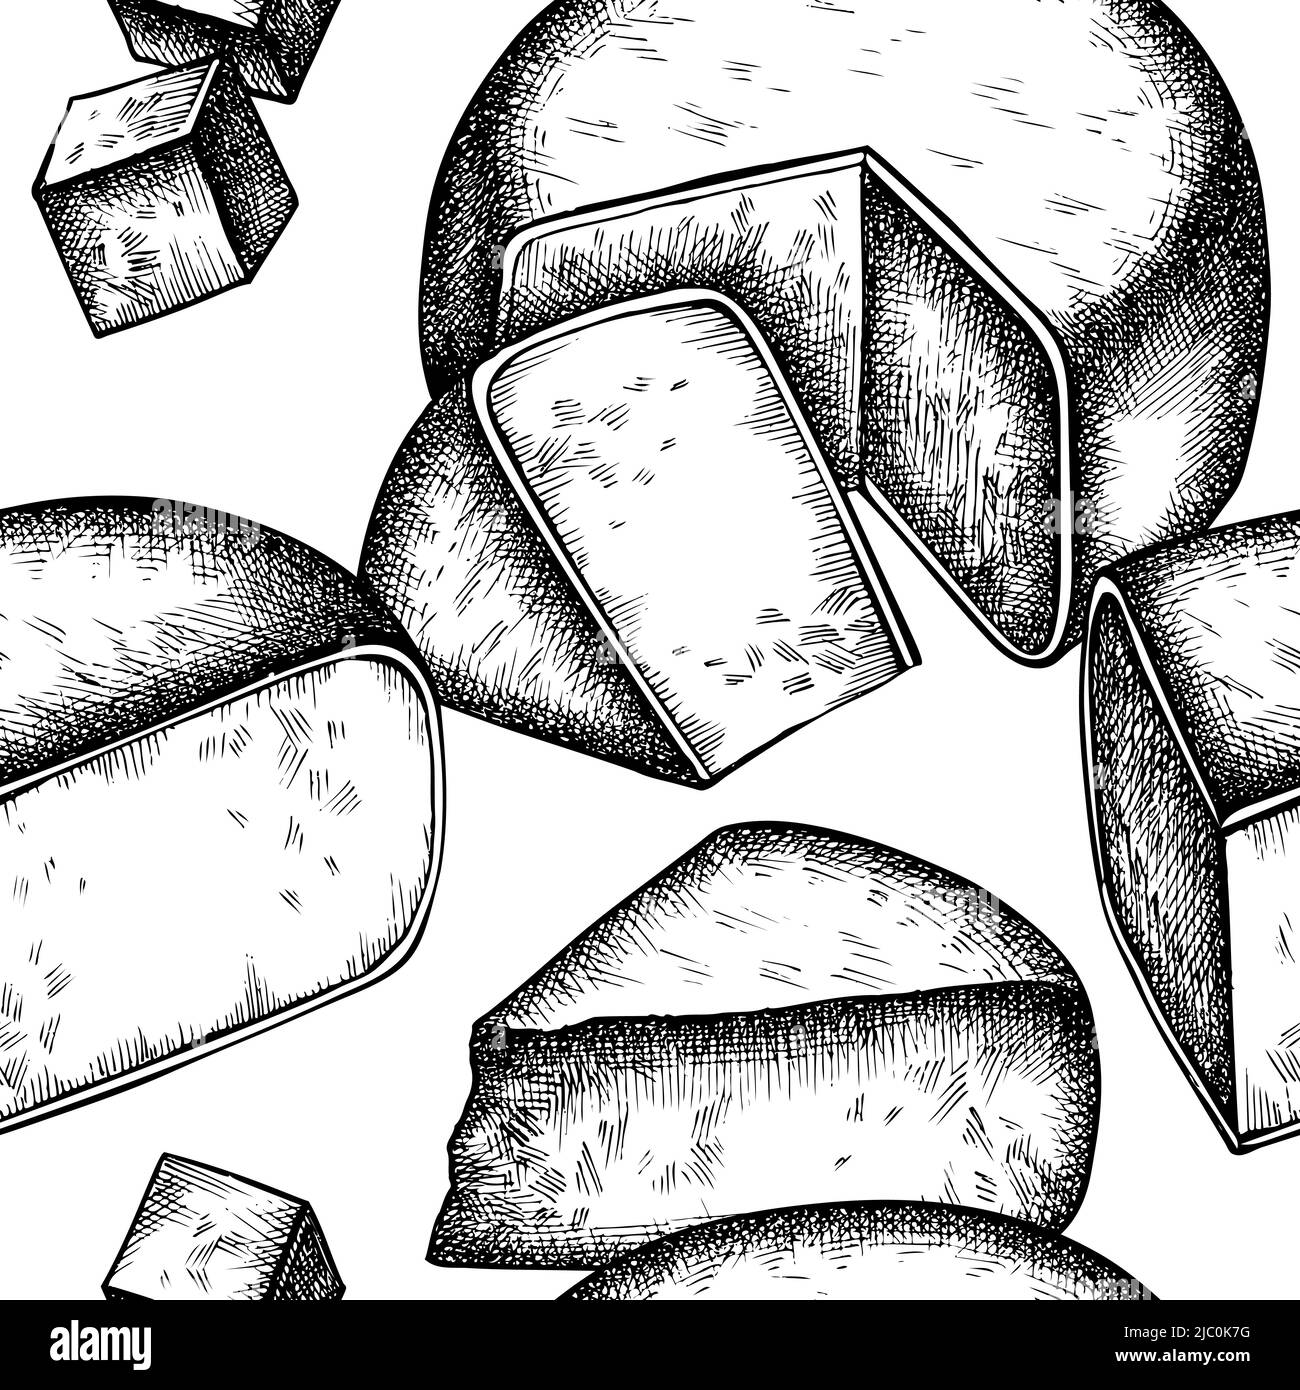 Cheese seamless pattern background design. Engraved style. Hand drawn parmigiano reggiano. Stock Vector